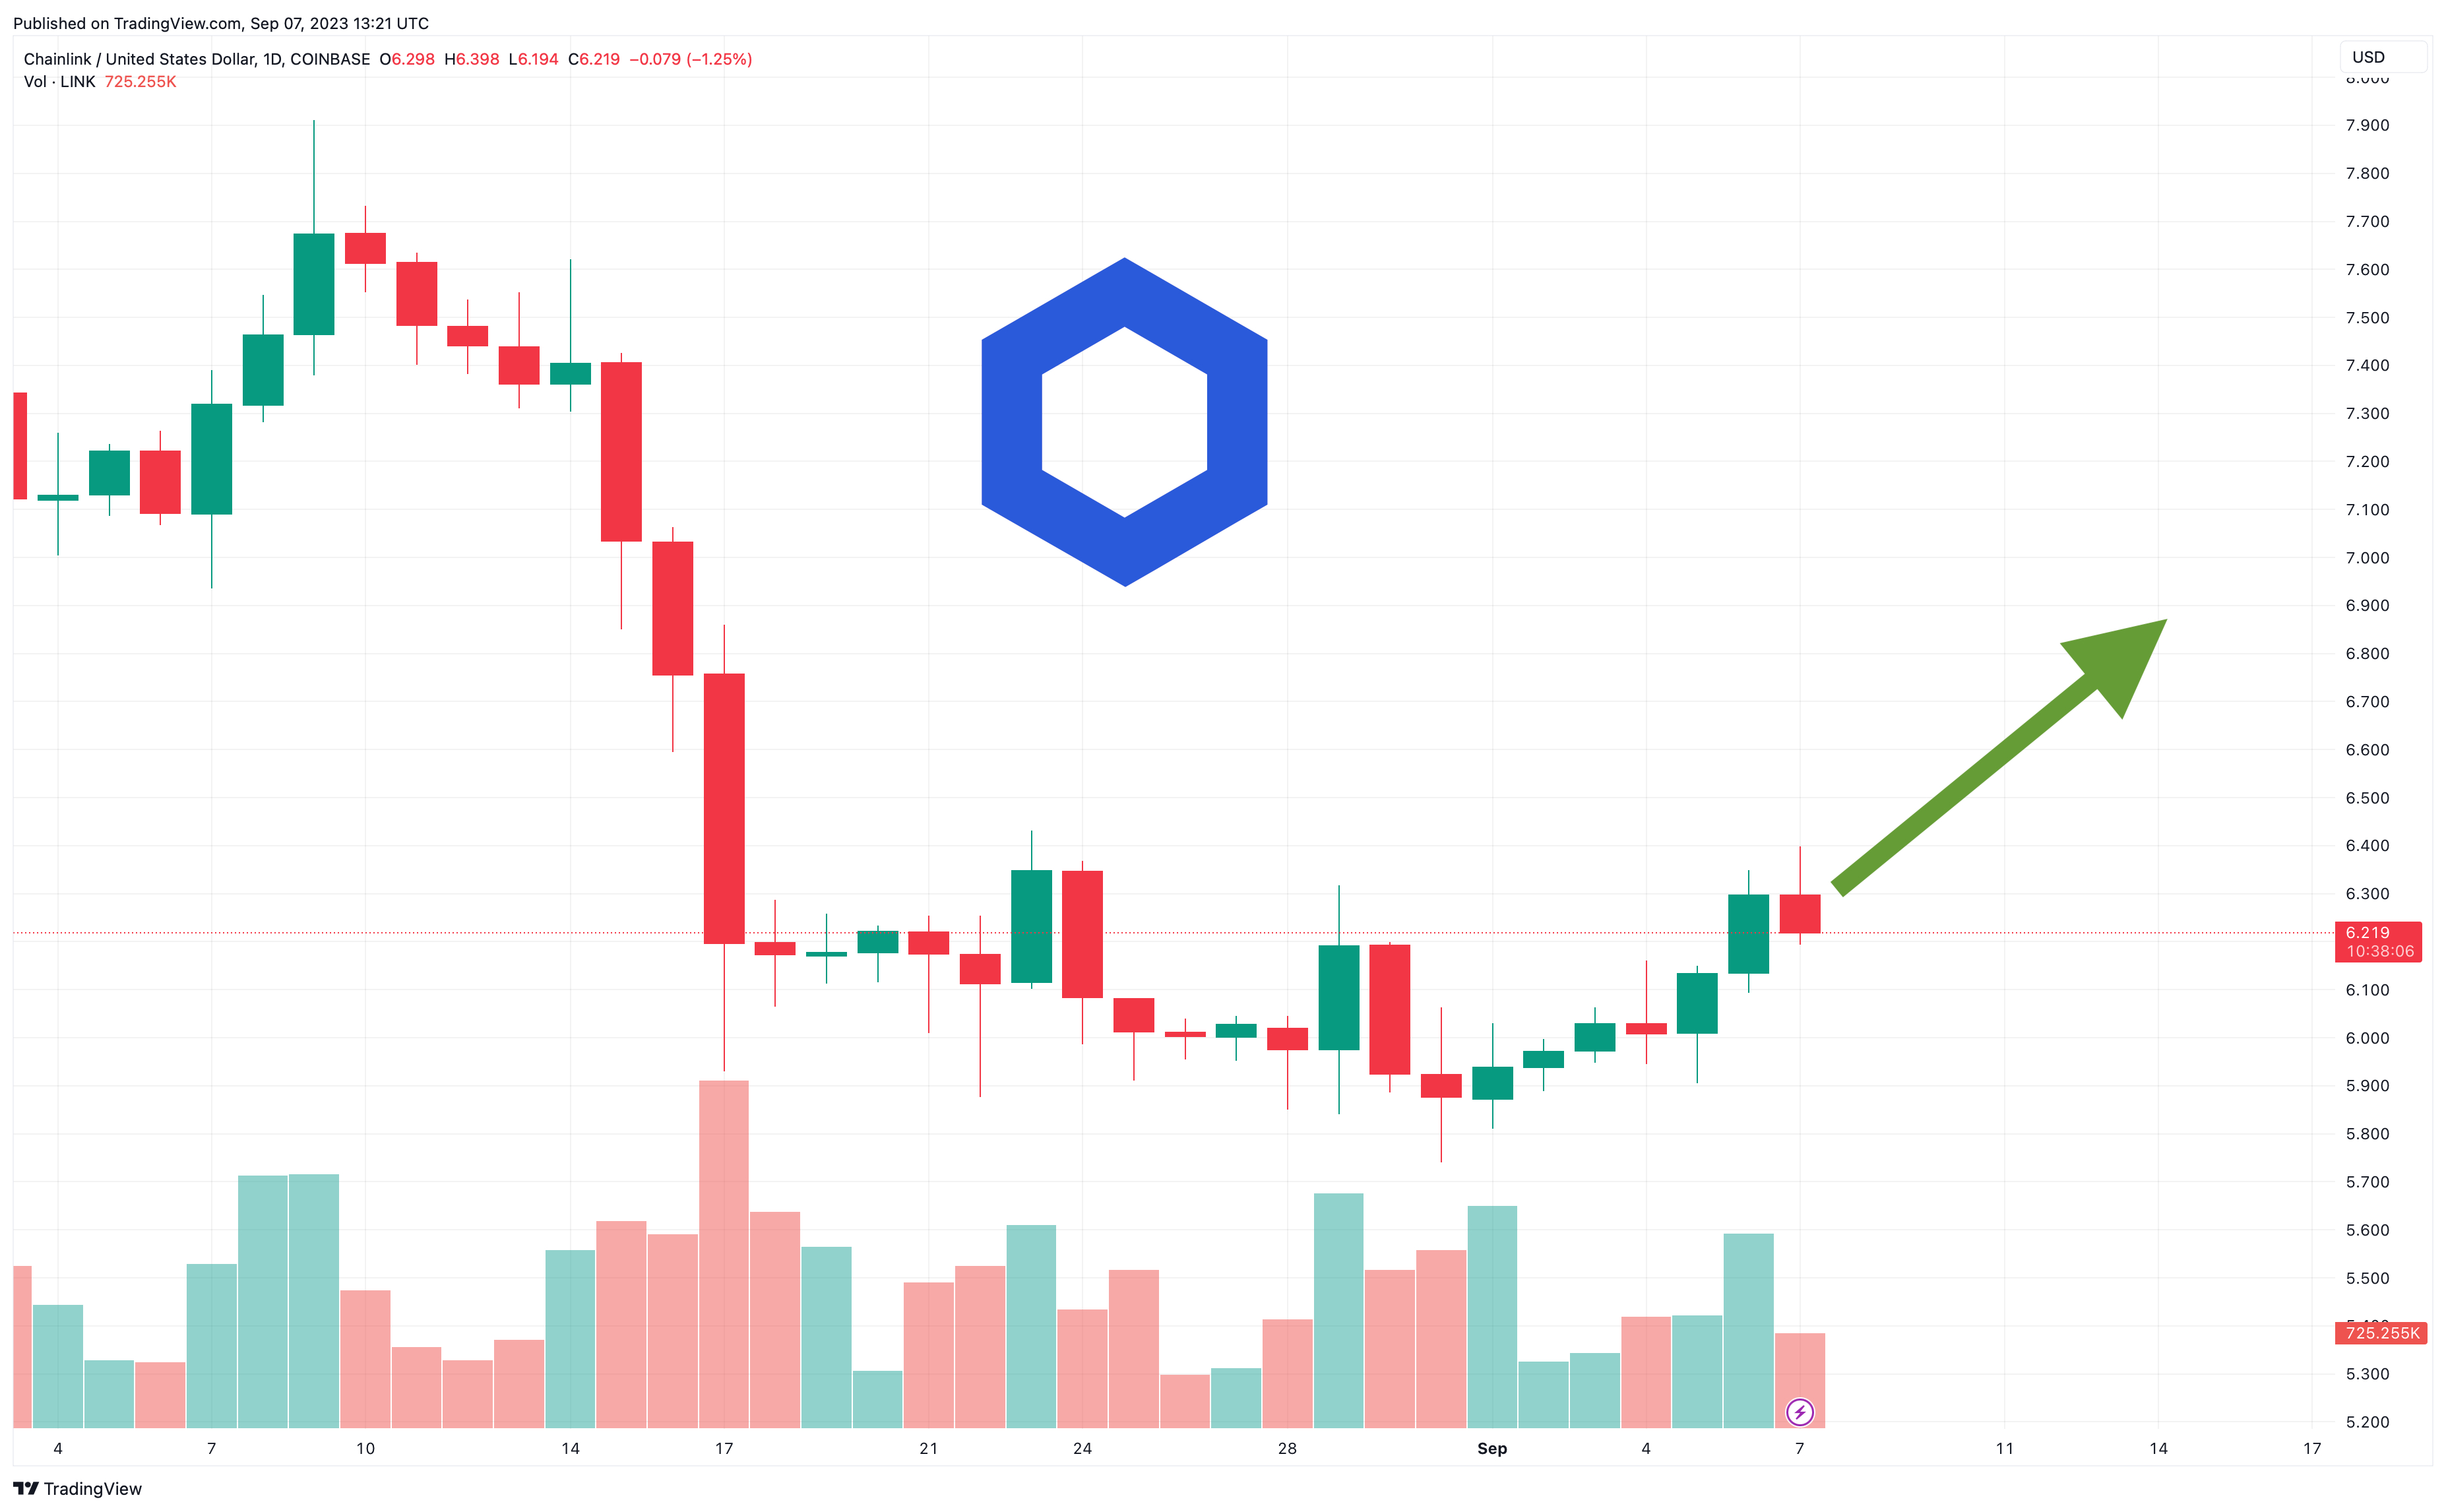 Chainlink (LINK) Price Prediction - 